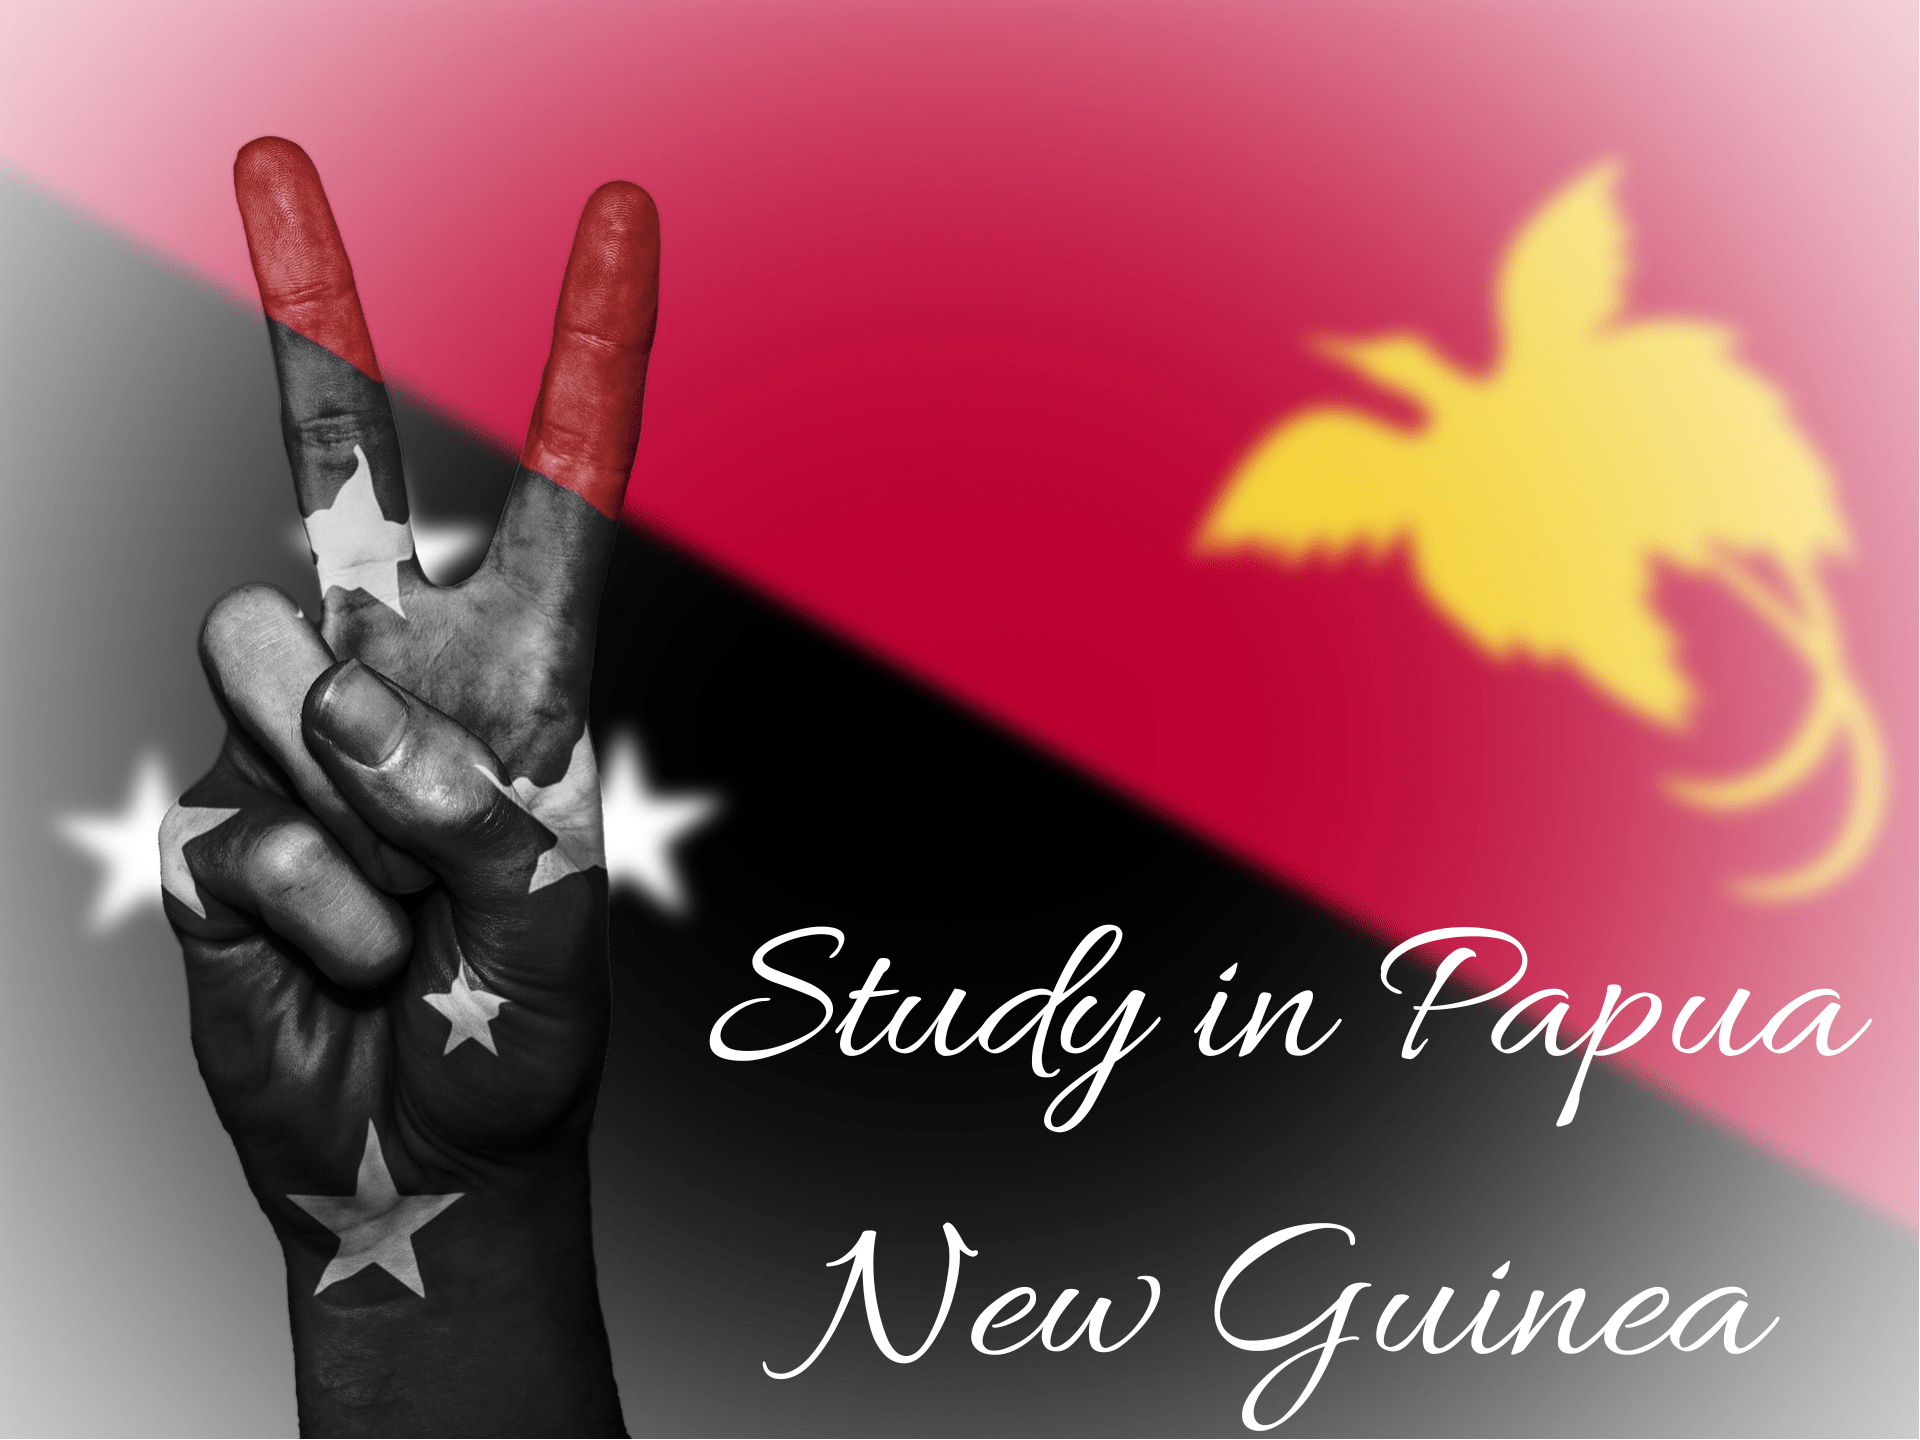 Study in Papua New Guinea Featured Image